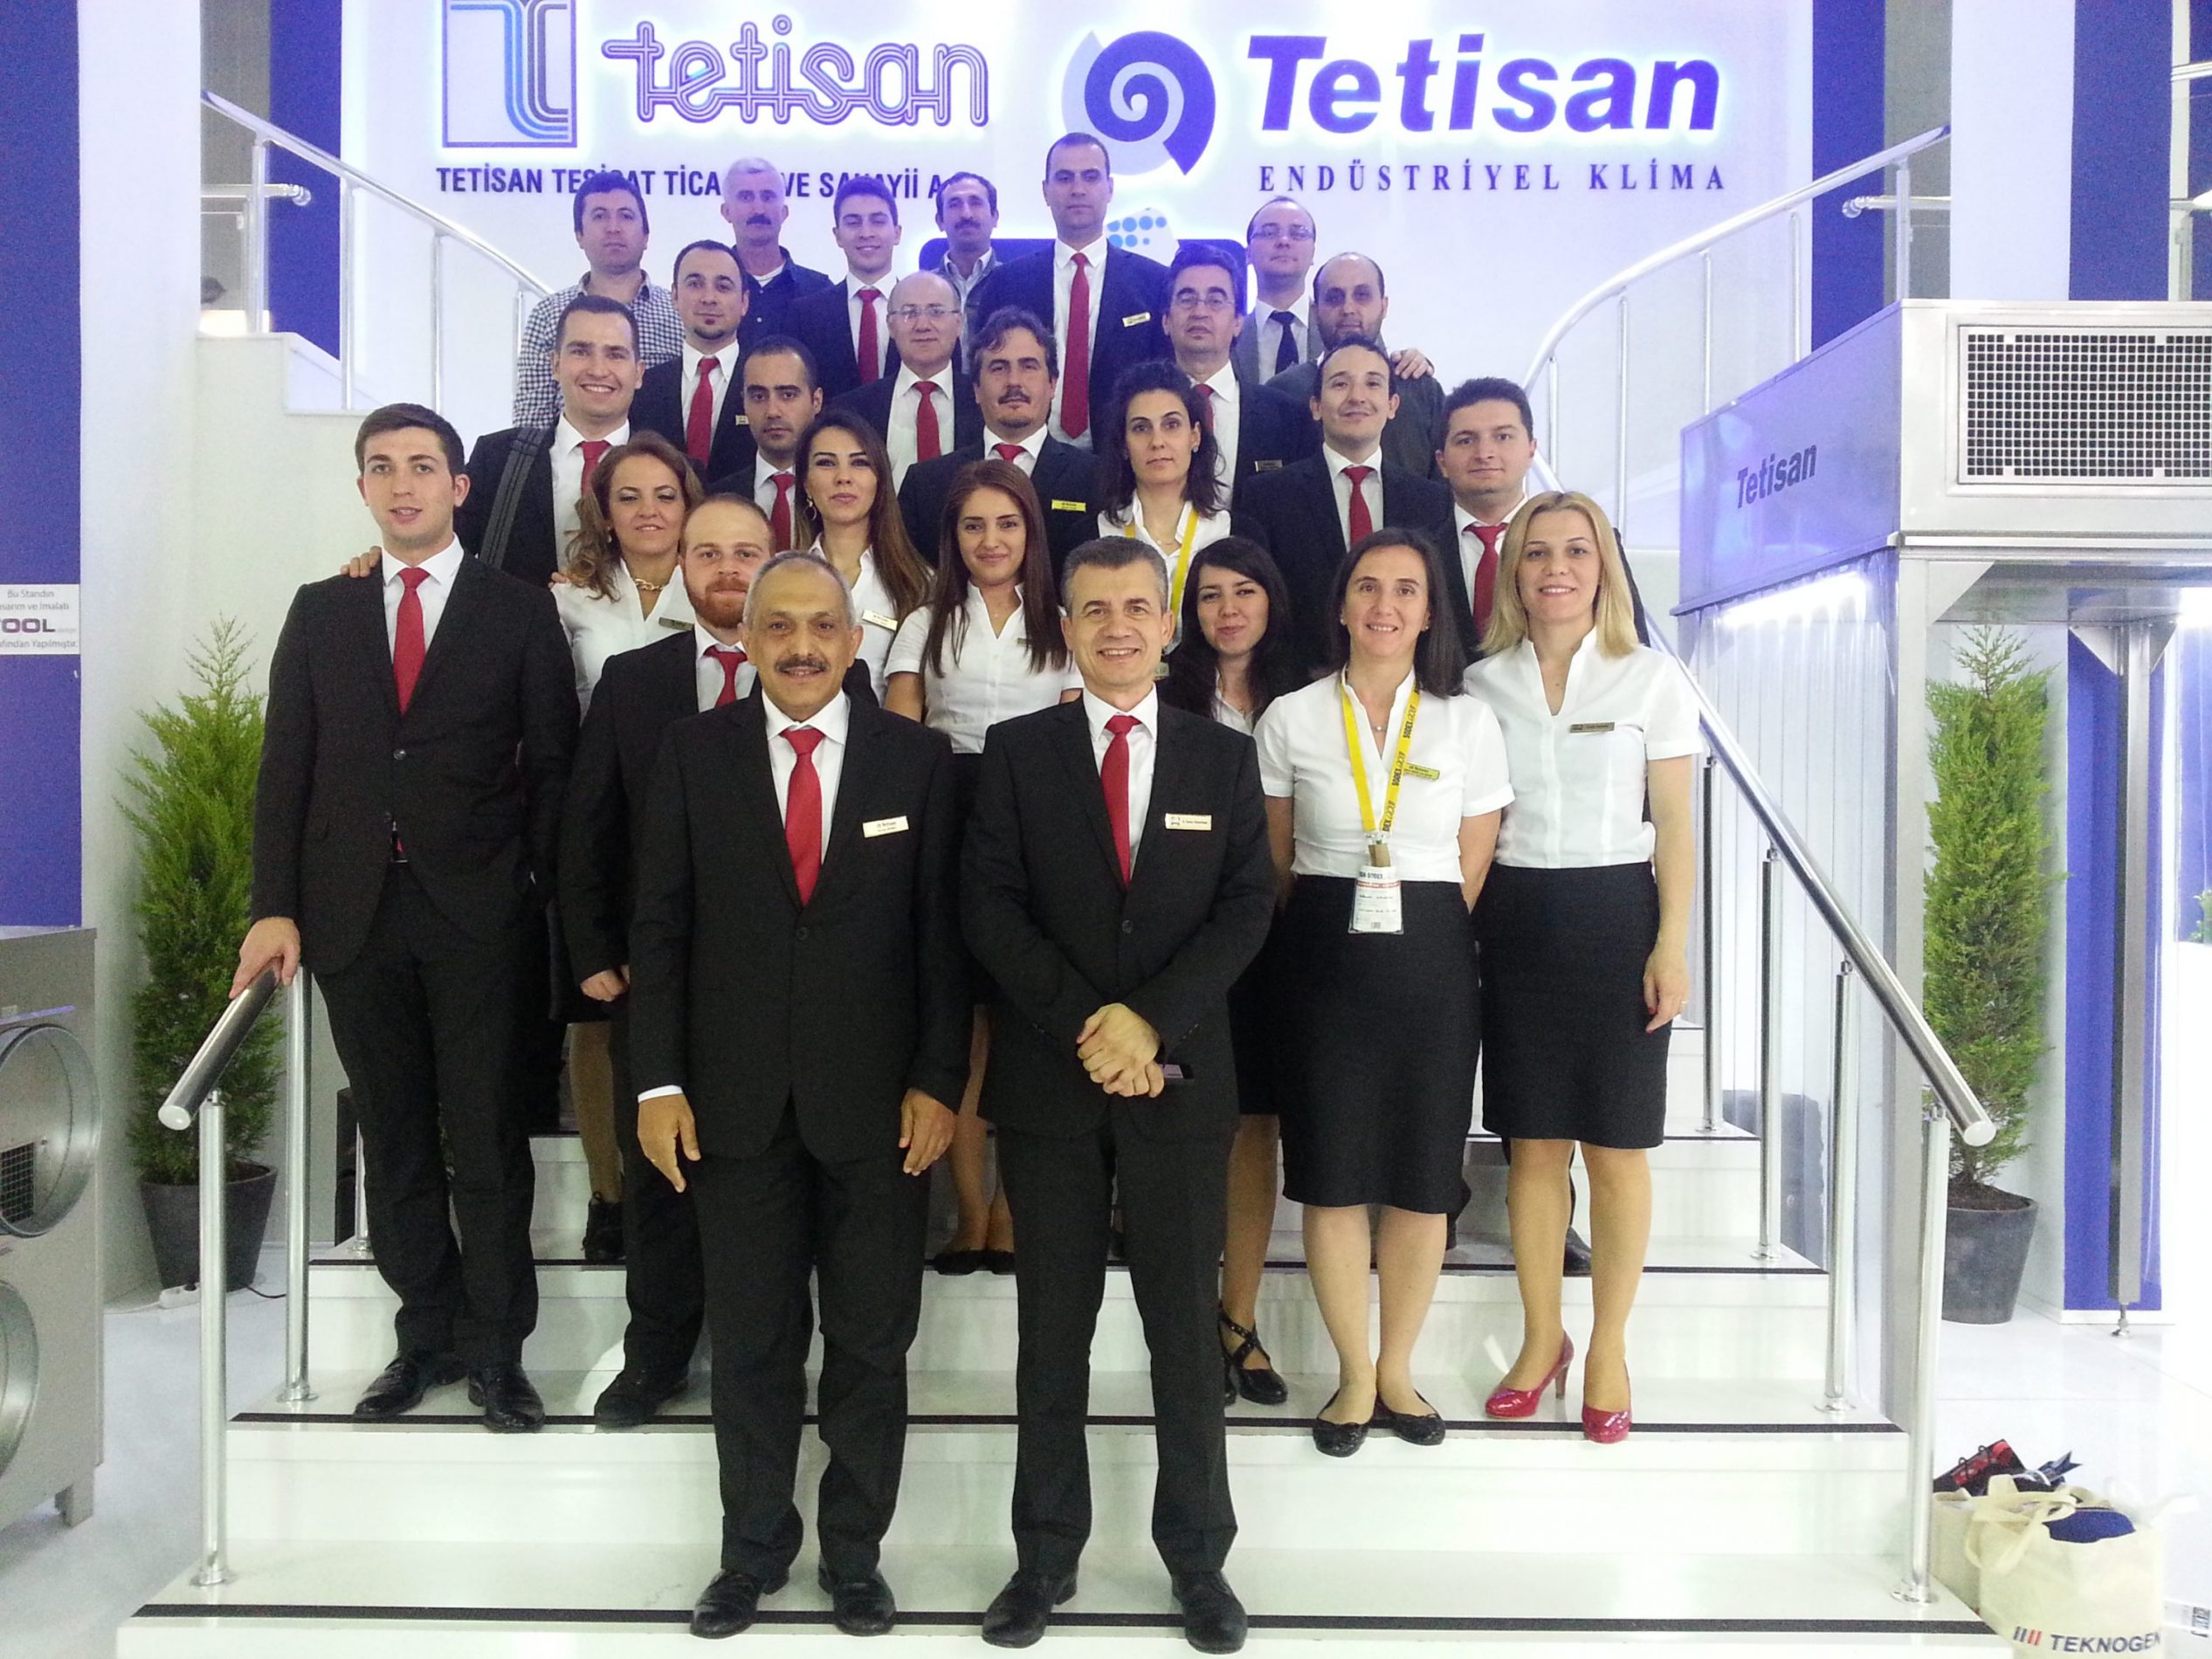 ISK-SODEX Istanbul 2014 hosted many domestic and foreign guests